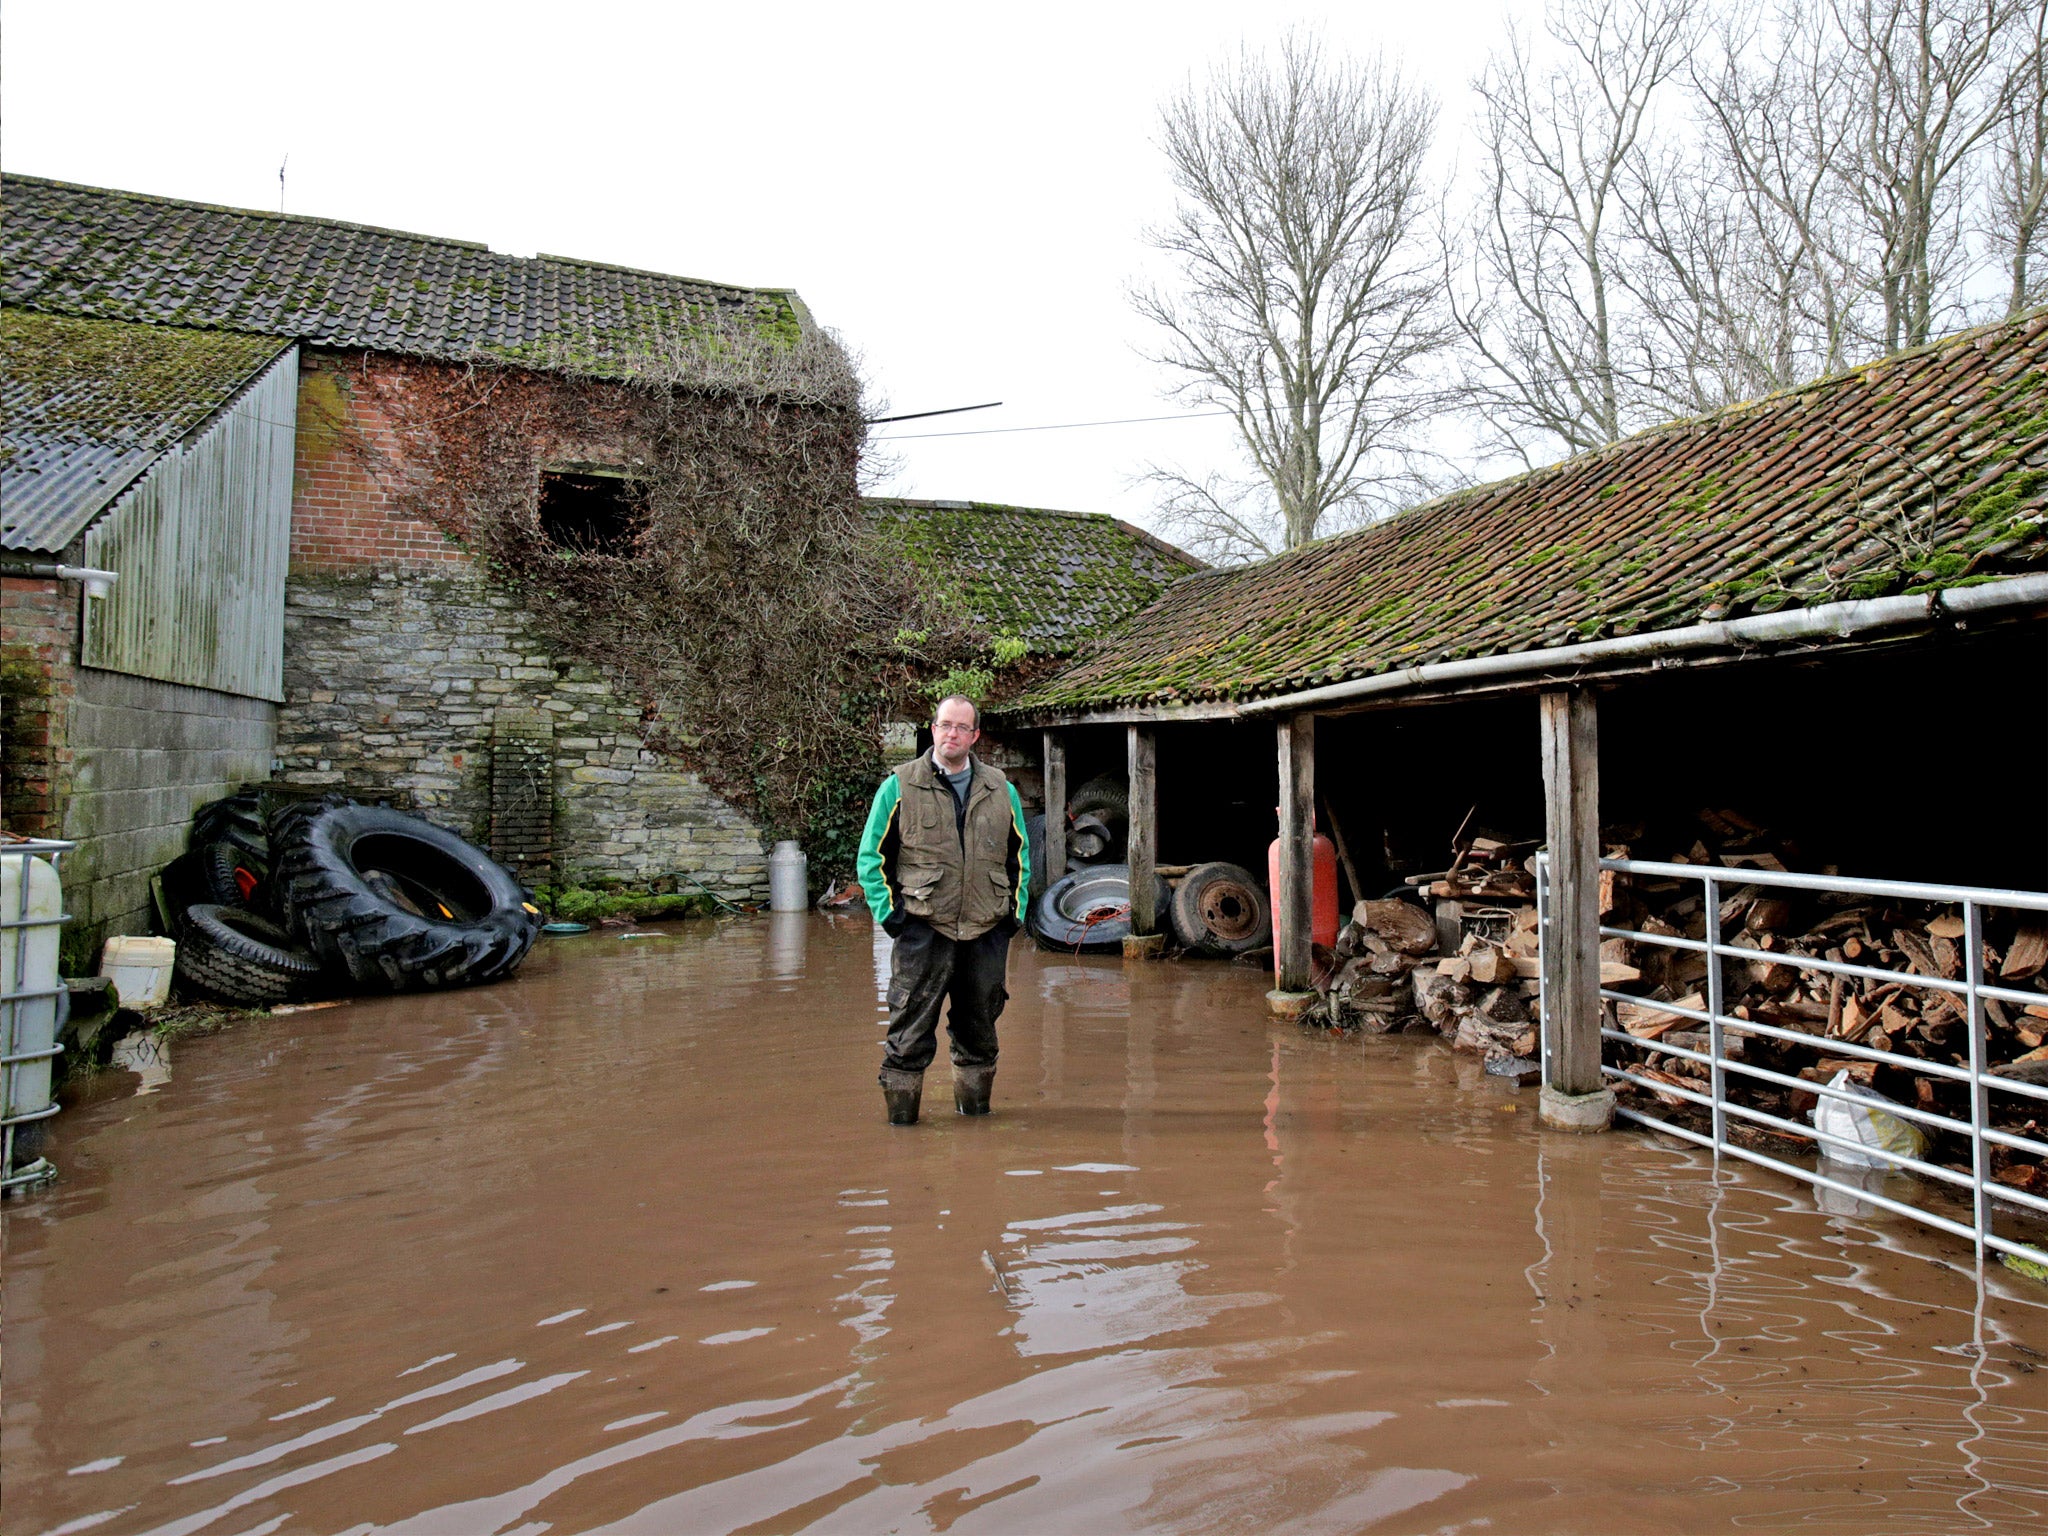 James Winslade’s Somerset farm lost £160,000 due to flooding last year. Some 94 per cent remains under water (Getty)